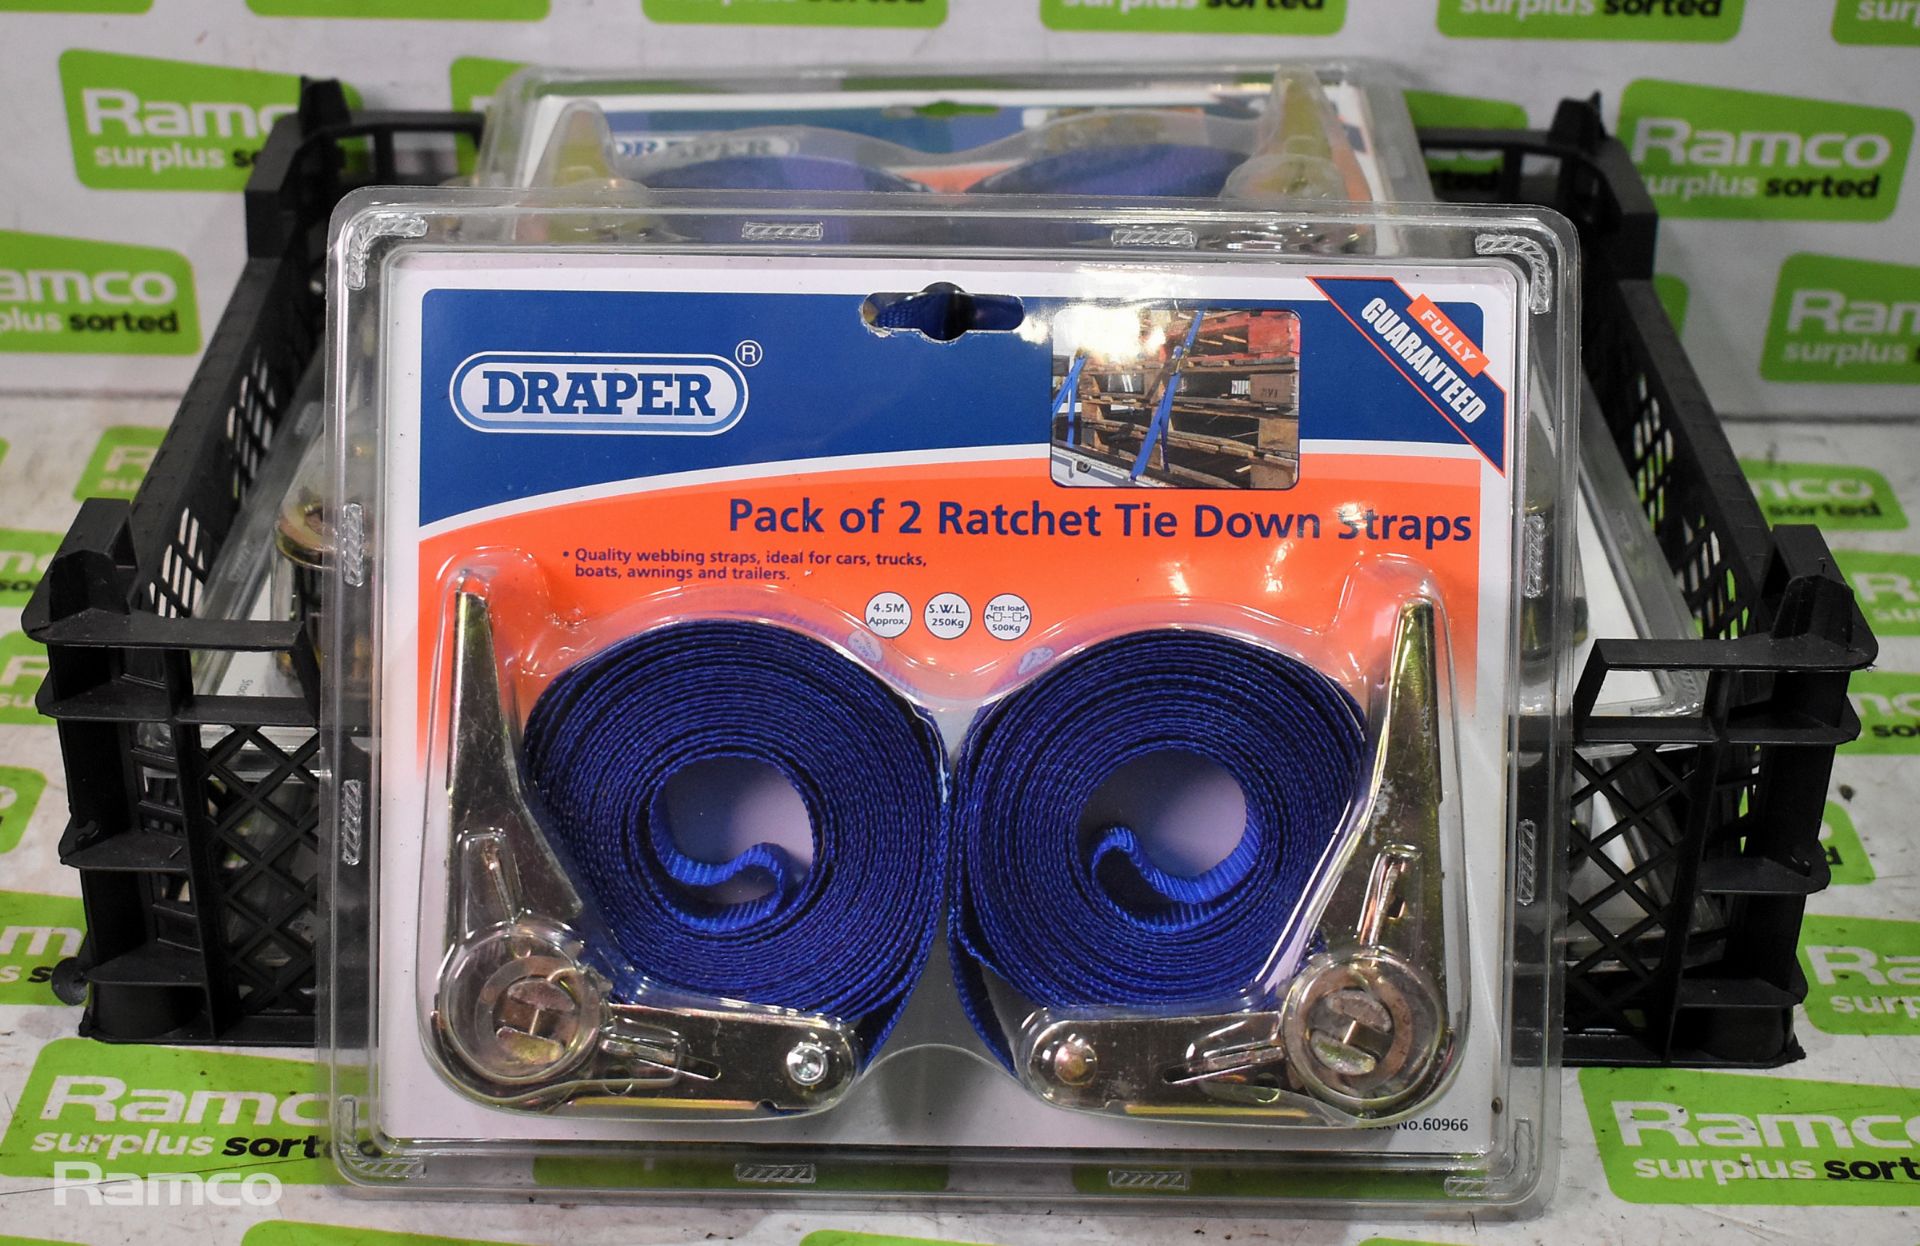 2x 16 piece stubby spanner sets, 6x twin pack 4.5m ratchet tie downs, 4x Green Jem ratchet straps - Image 4 of 9